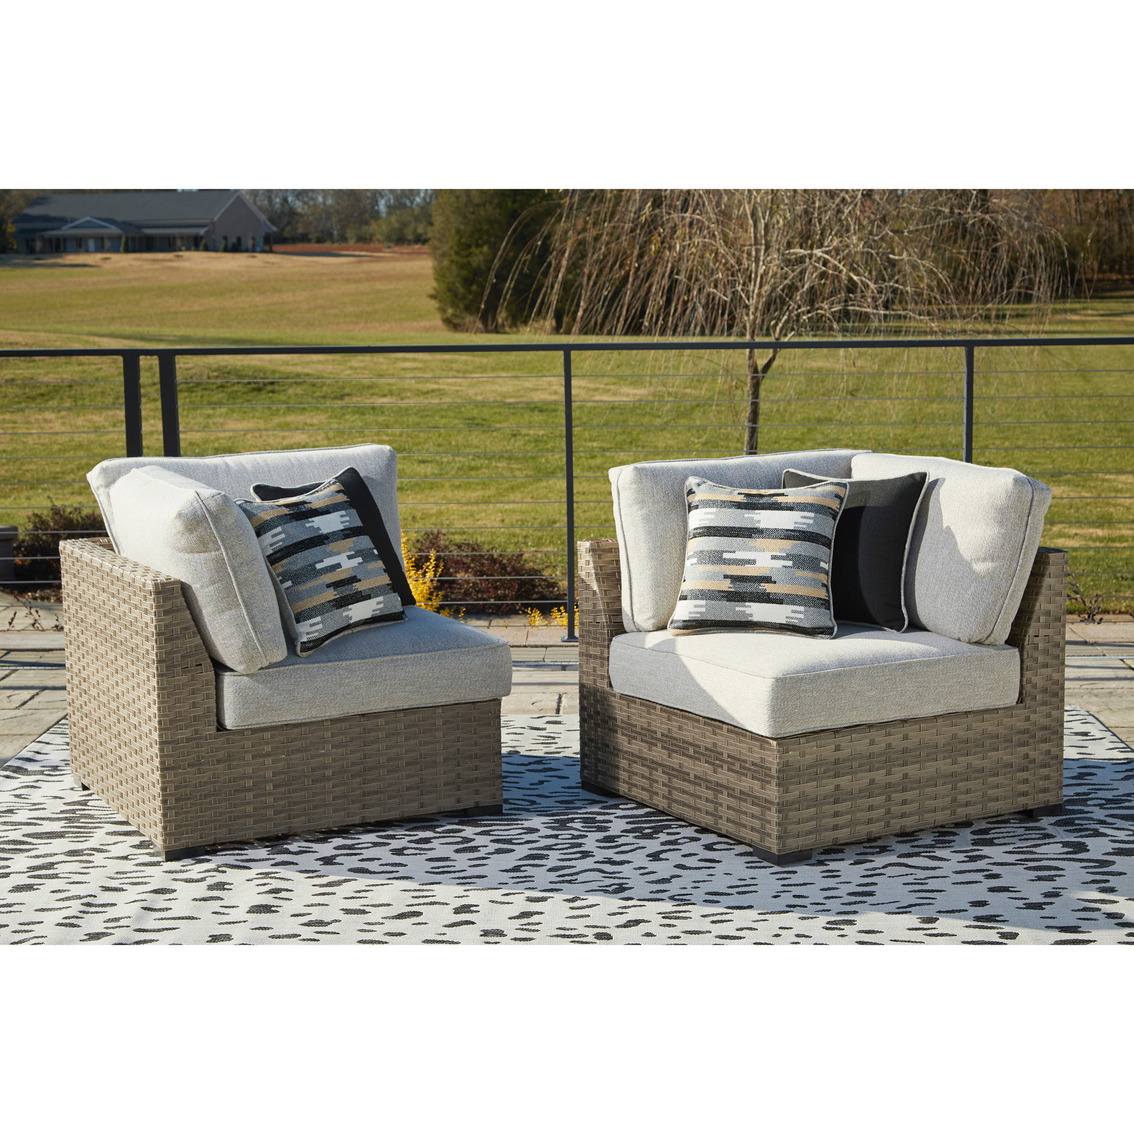 Signature Design by Ashley Calworth Outdoor Sectional 8 pc. Set - Image 3 of 6